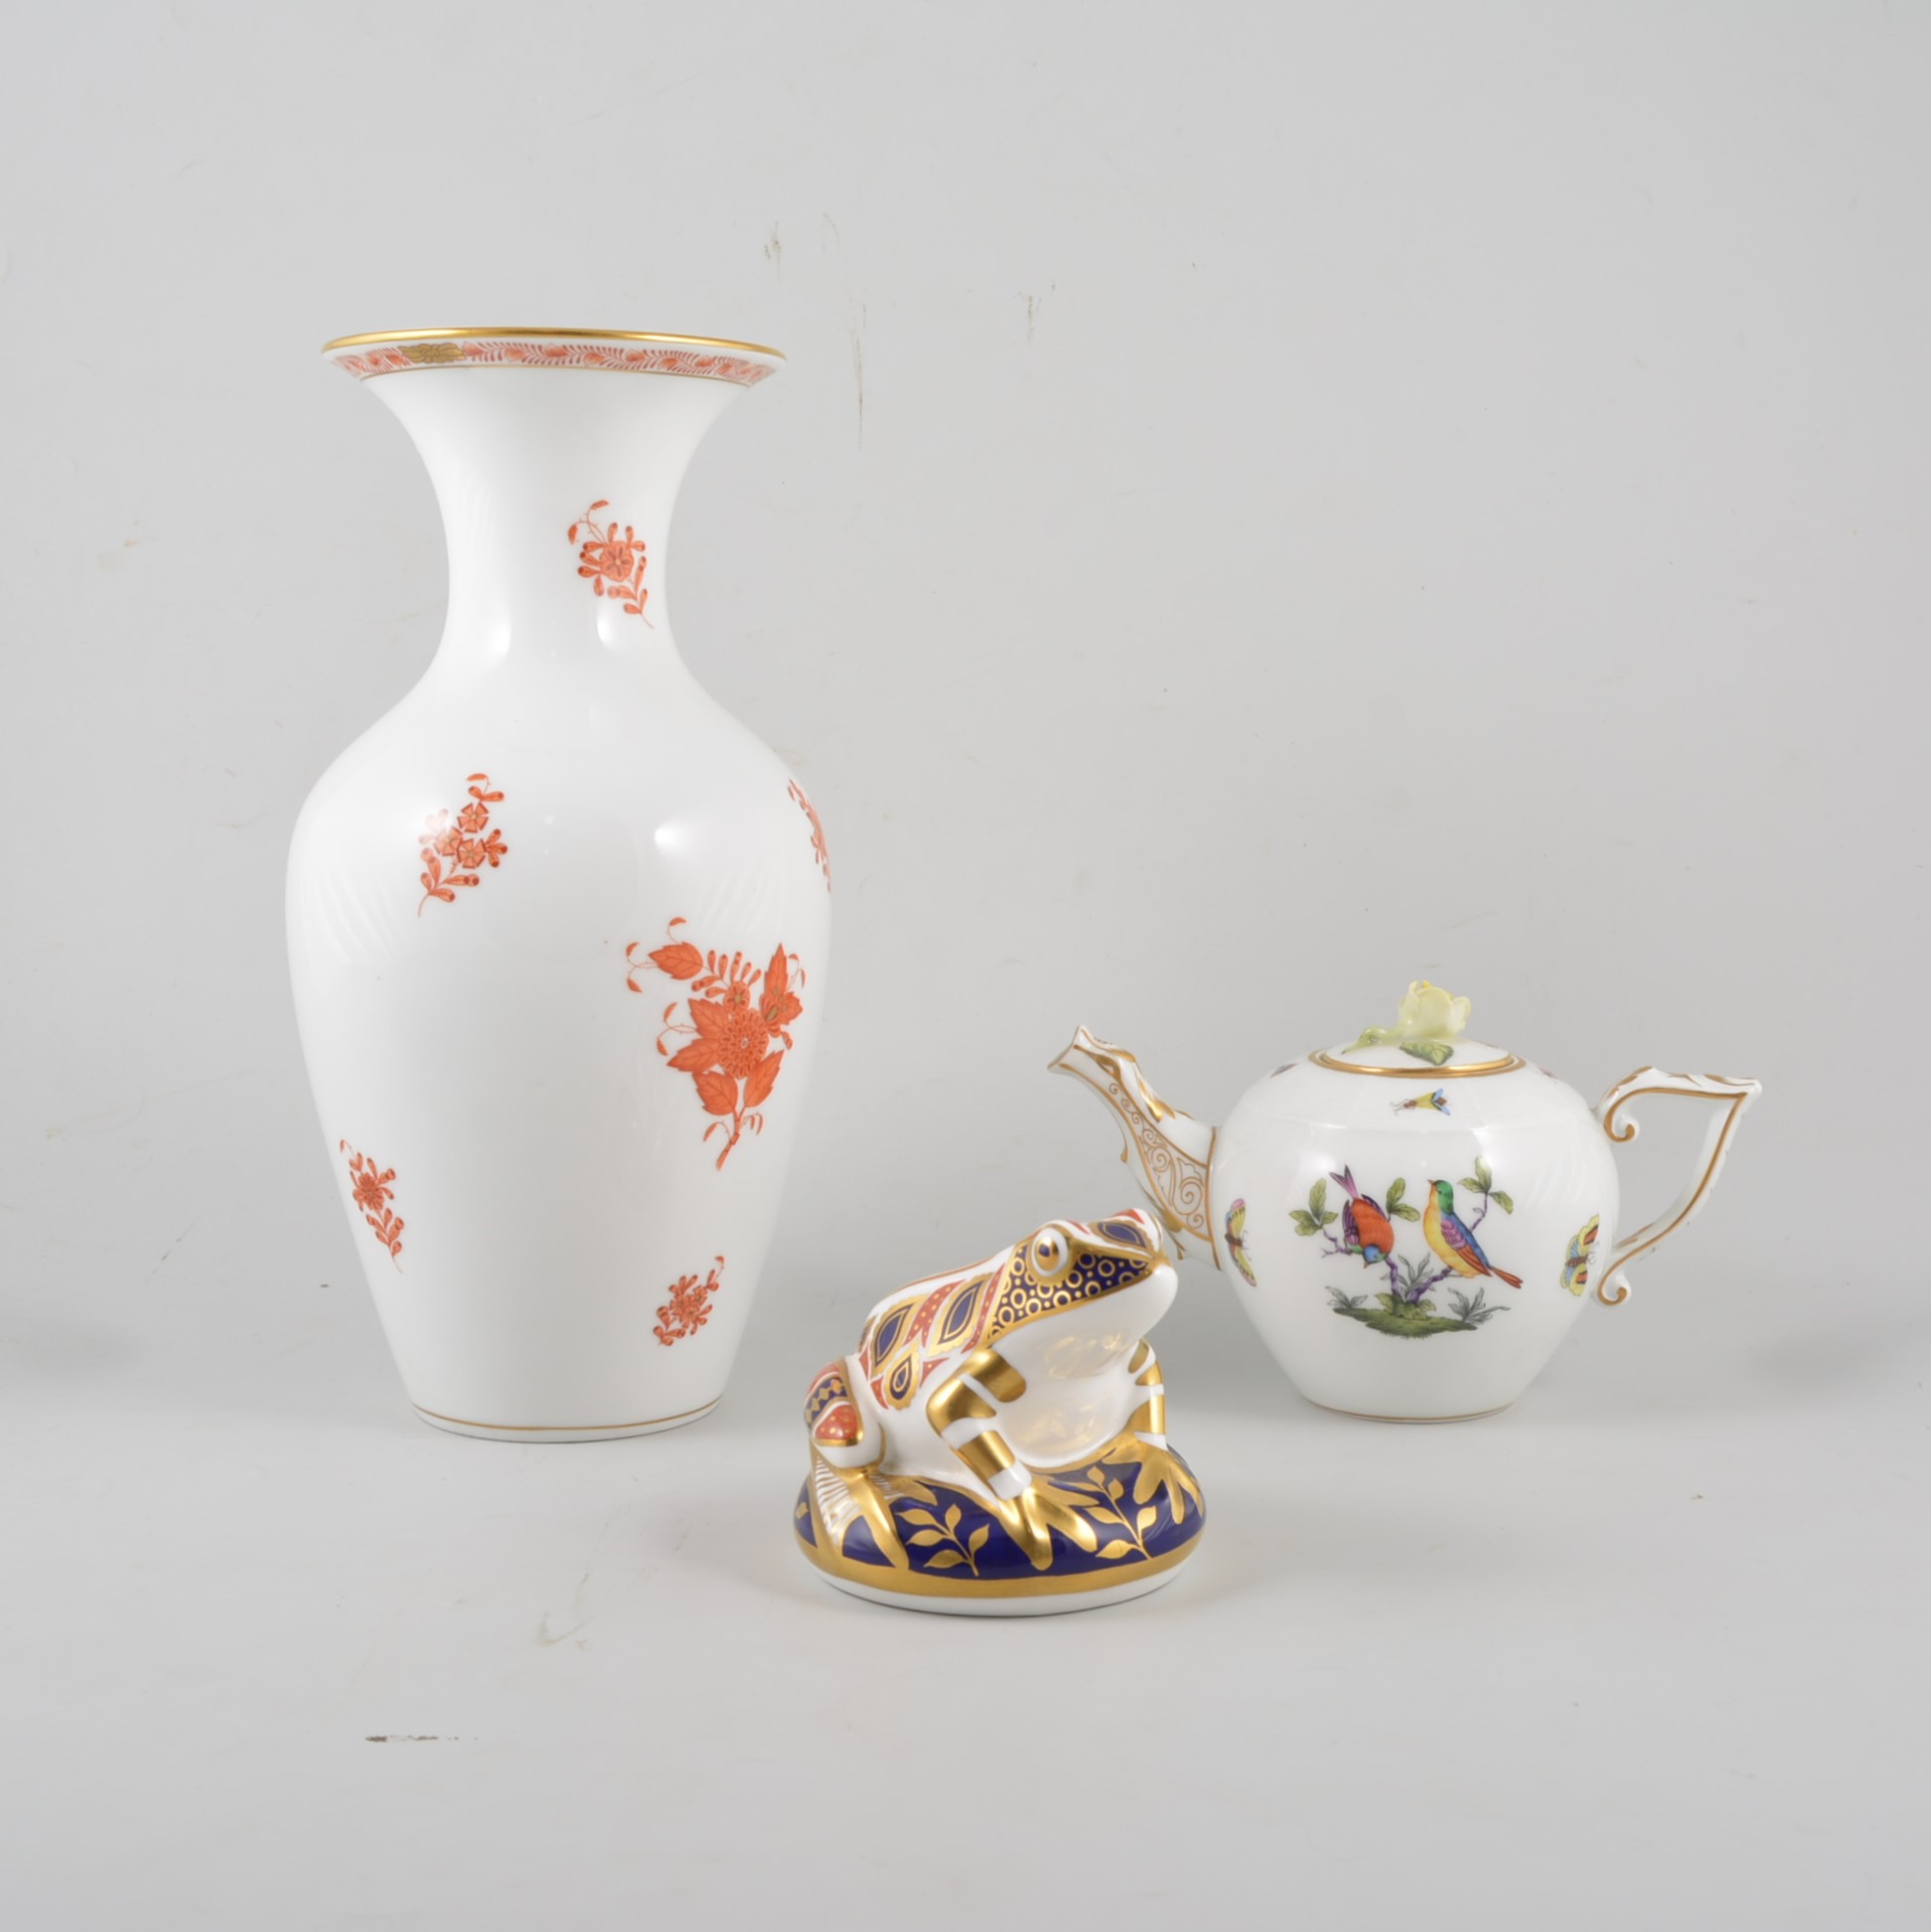 Herend teapot, painted with birds and insects, vase, dishes,